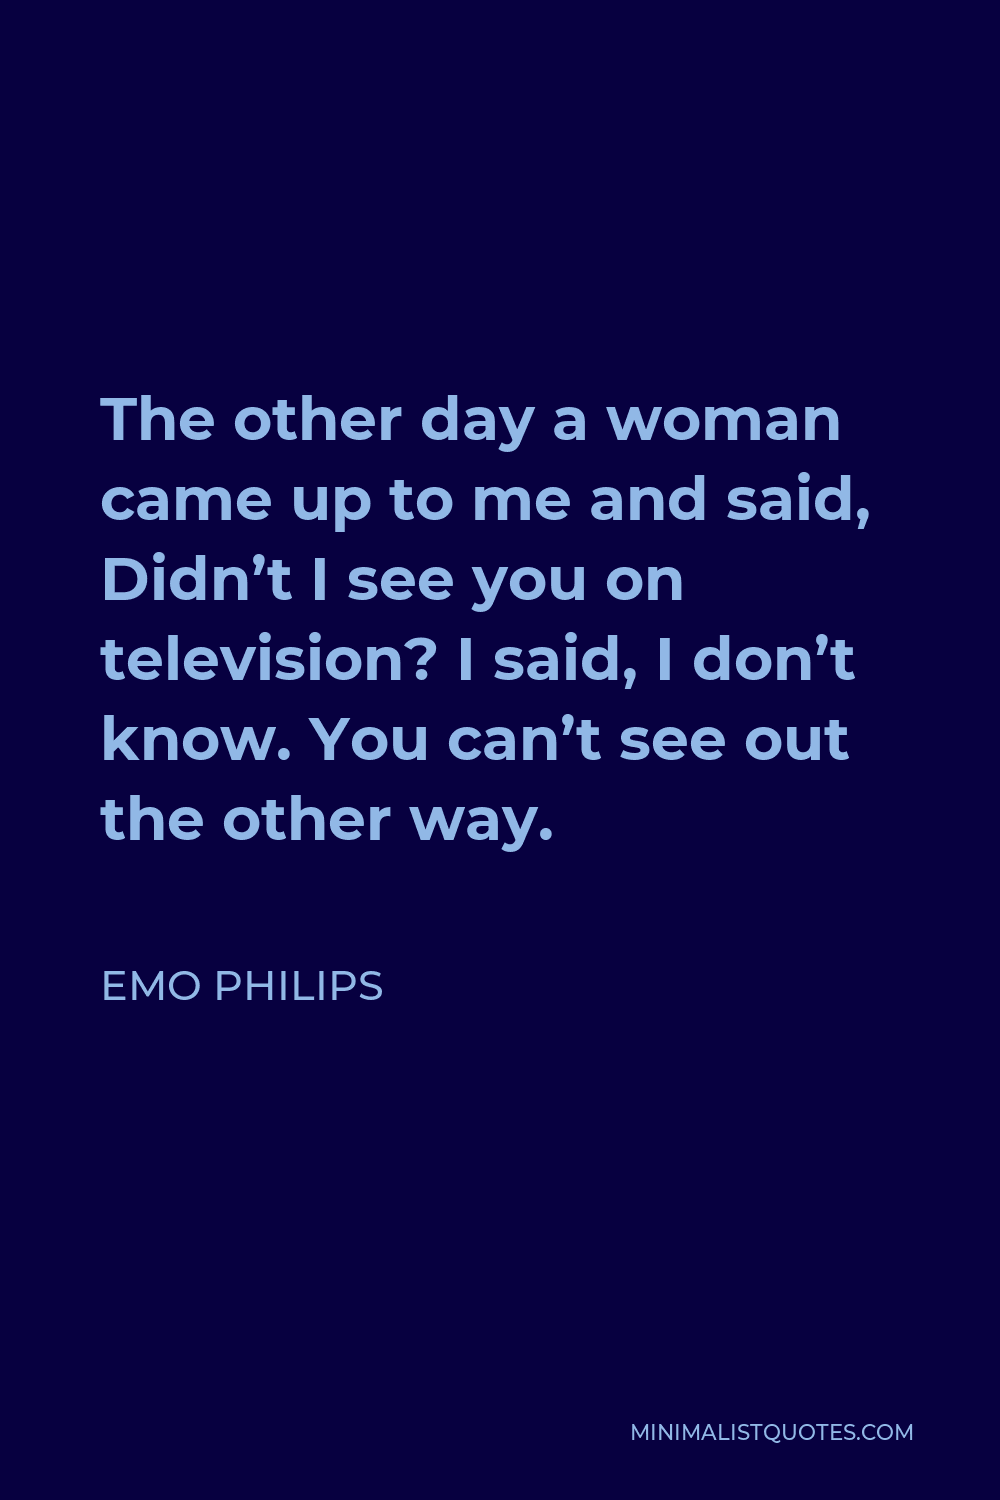 Emo Philips Quote - The other day a woman came up to me and said, Didn’t I see you on television? I said, I don’t know. You can’t see out the other way.